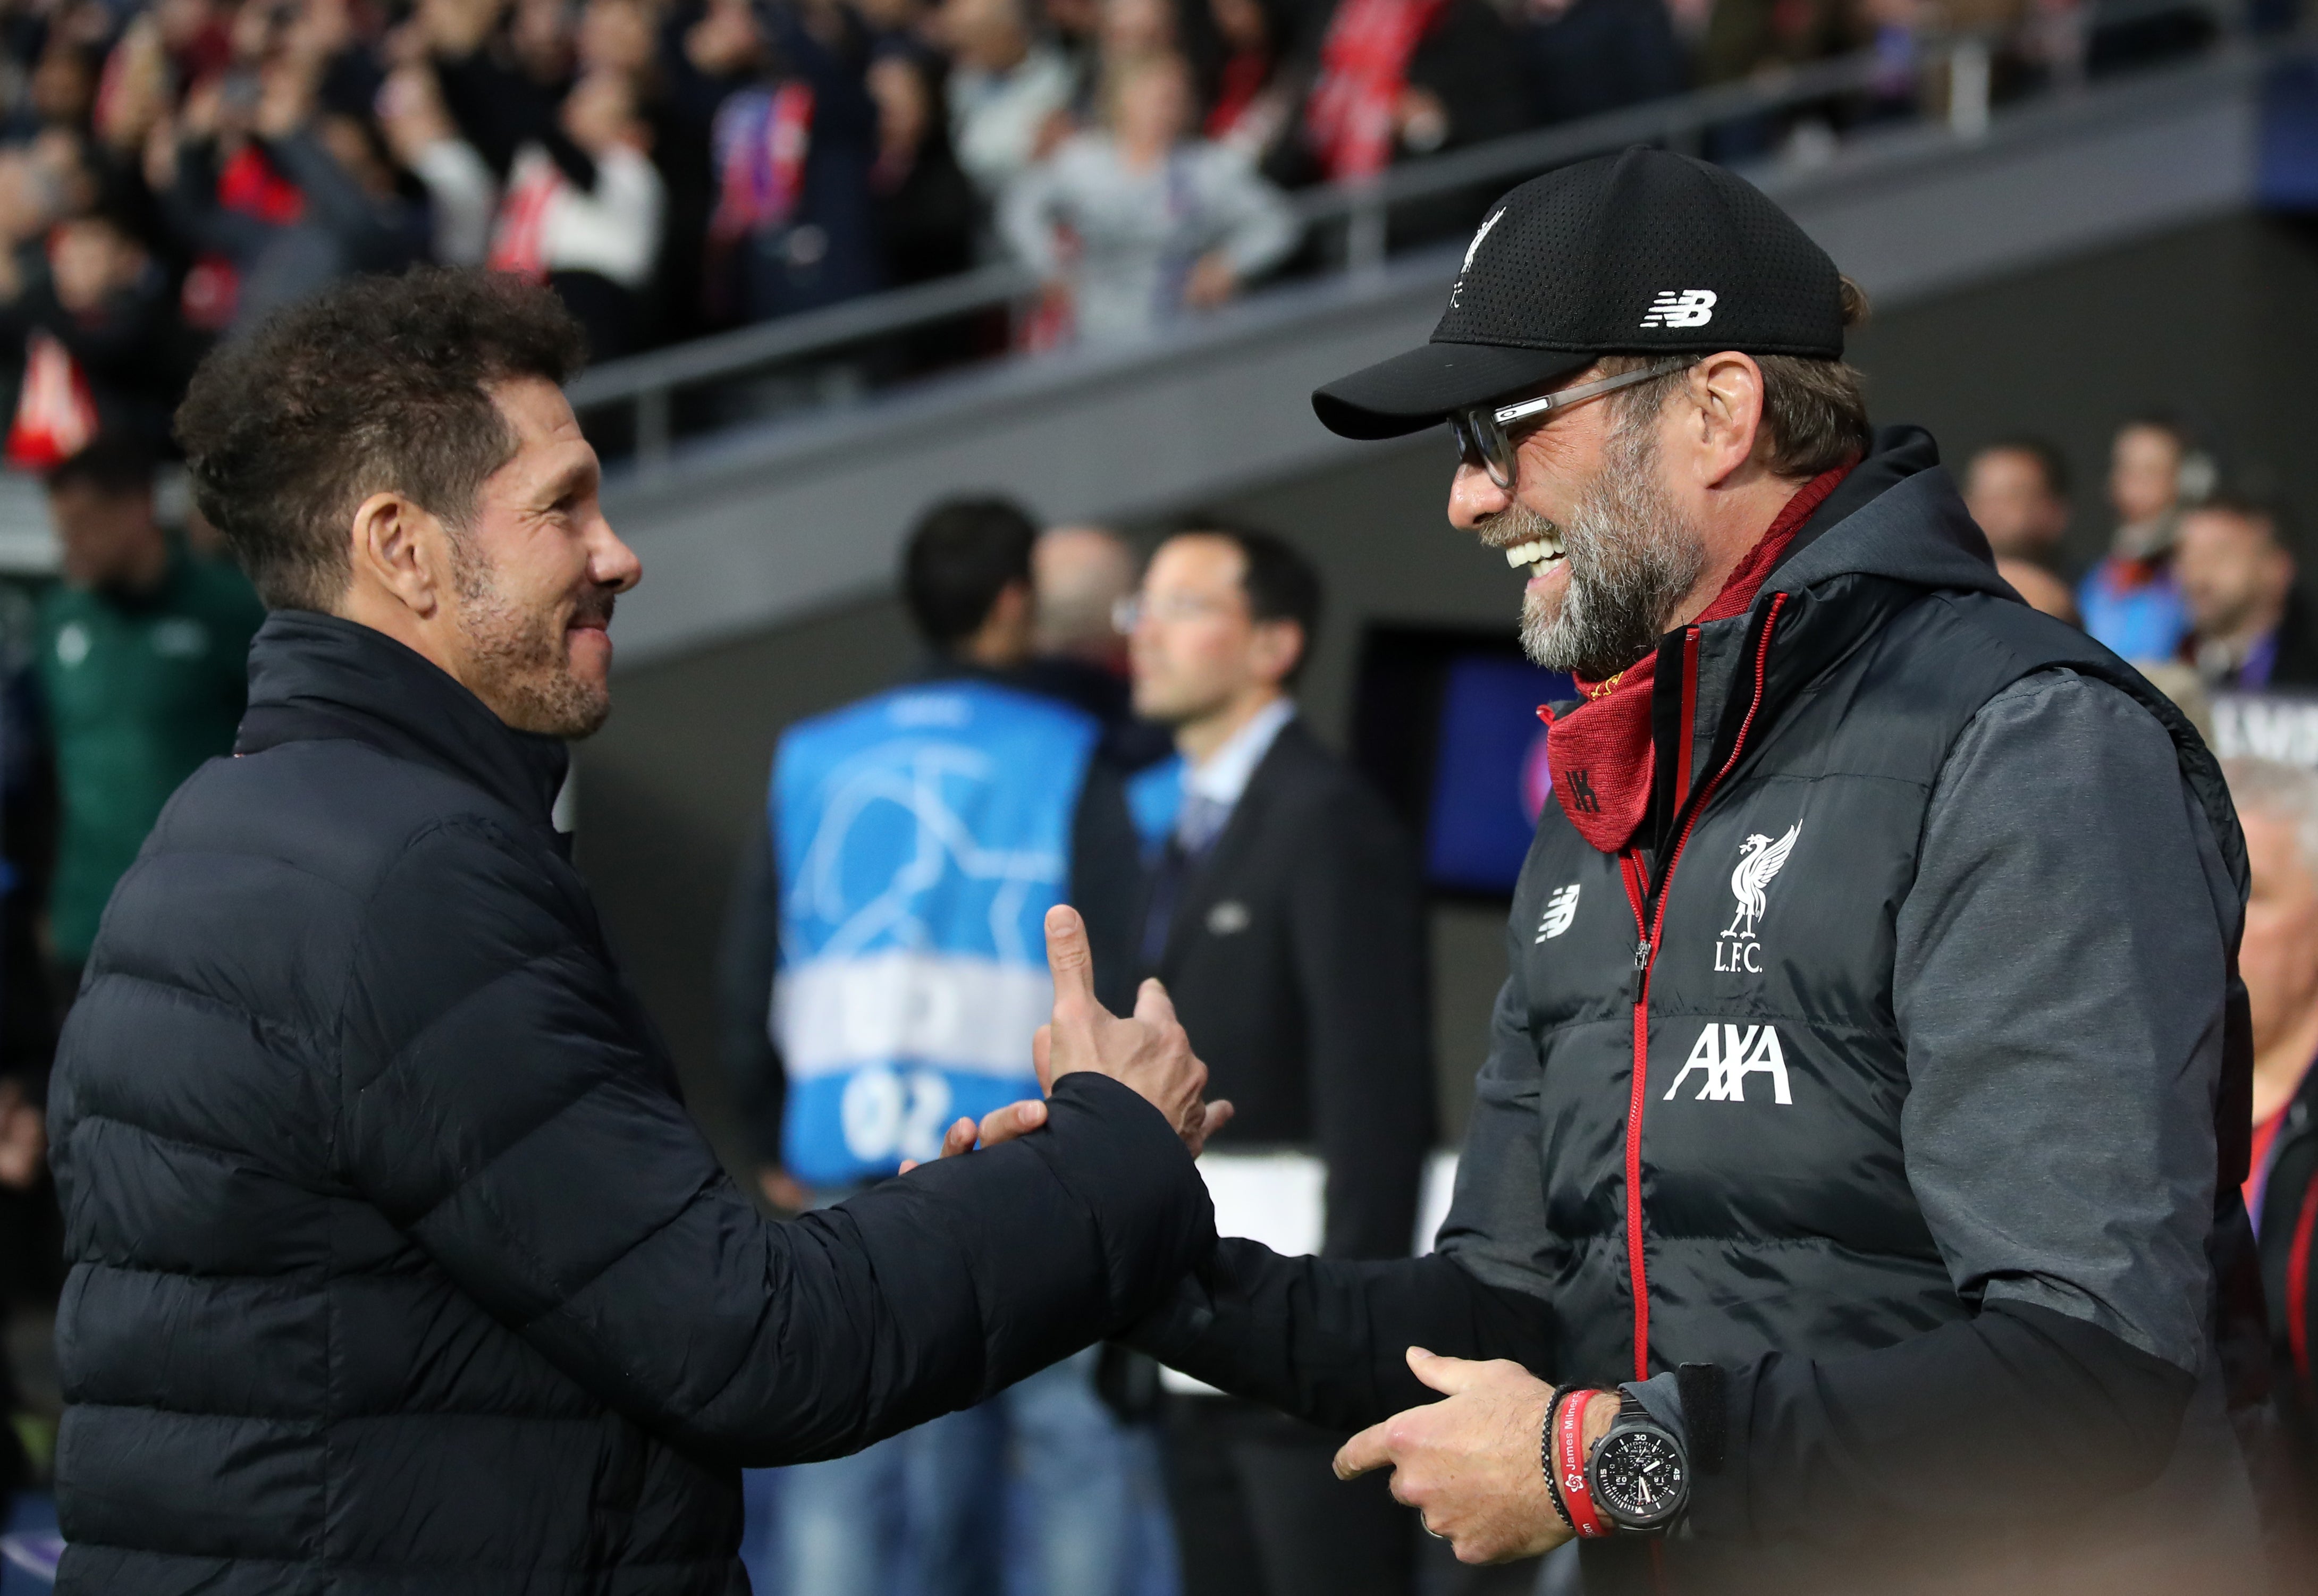 Atletico Madrid manager Diego Simeone is not interested in “false” post-match handshakes with opposing managers (Nick Potts/PA)